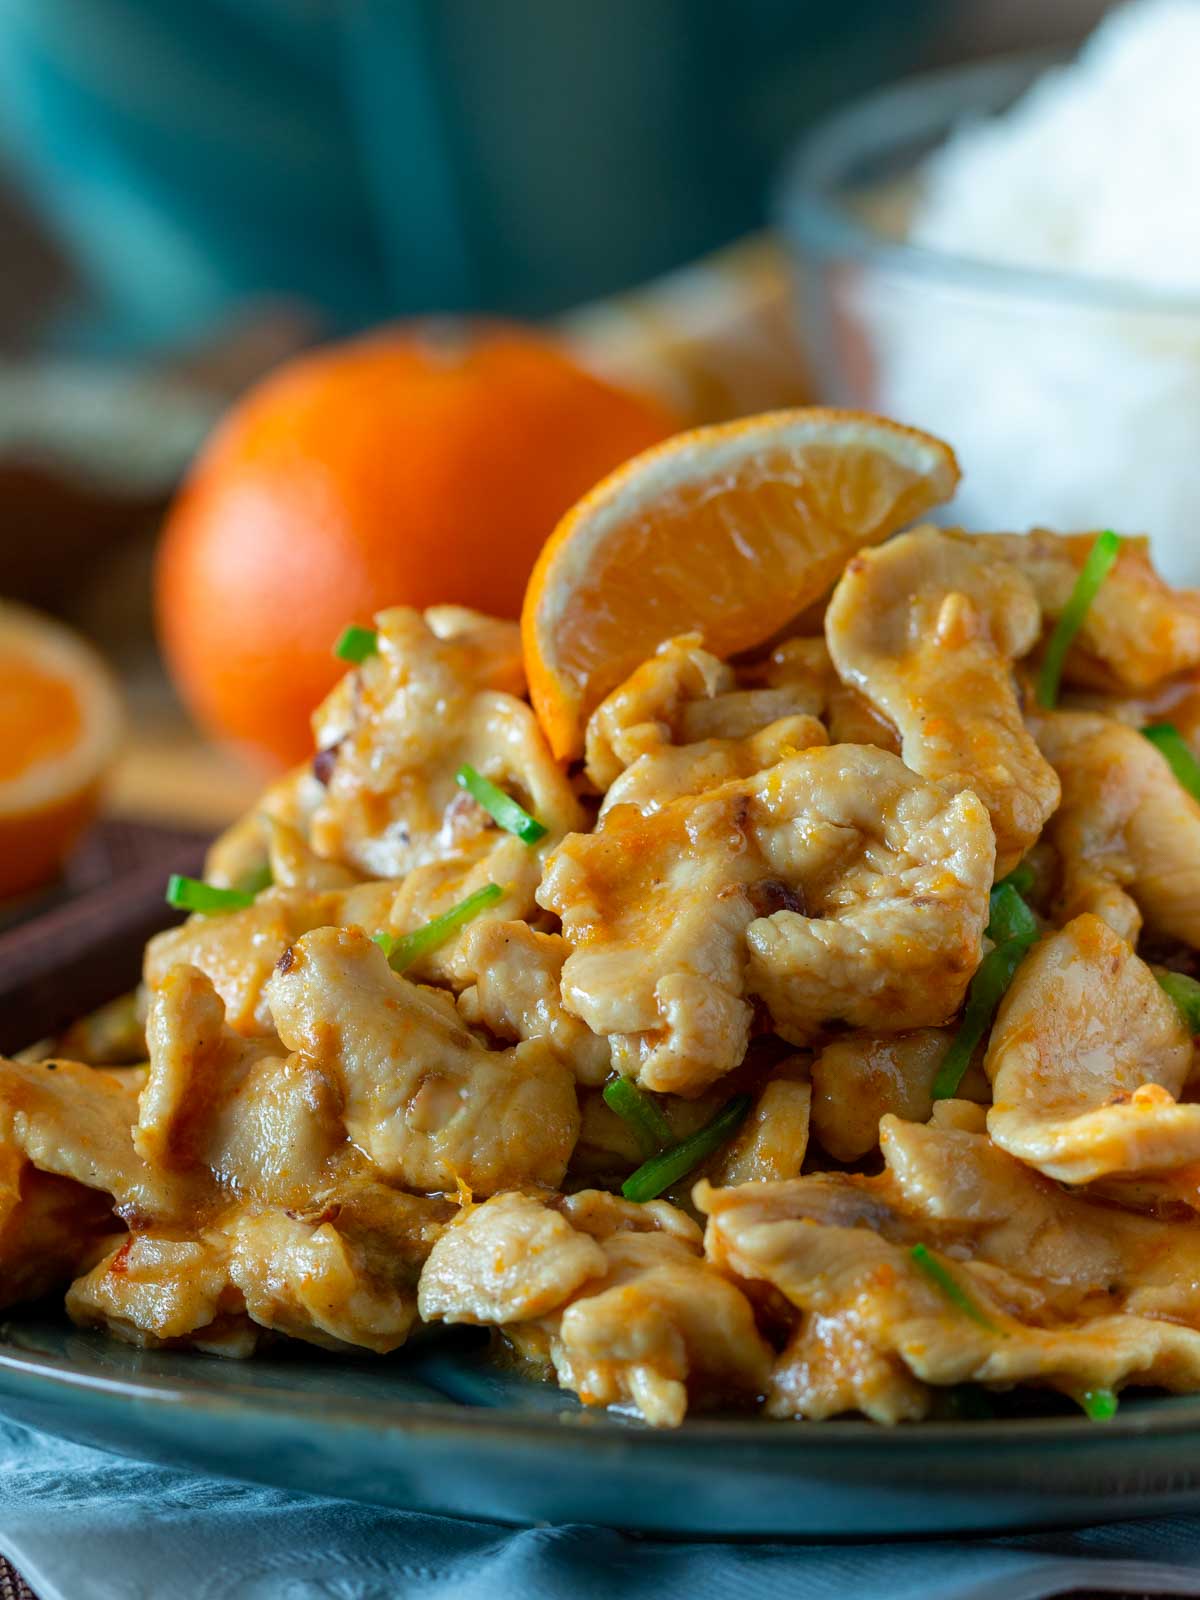 Close up of the tangerine chicken showing the glossy orange sauce and tender chicken pieces.